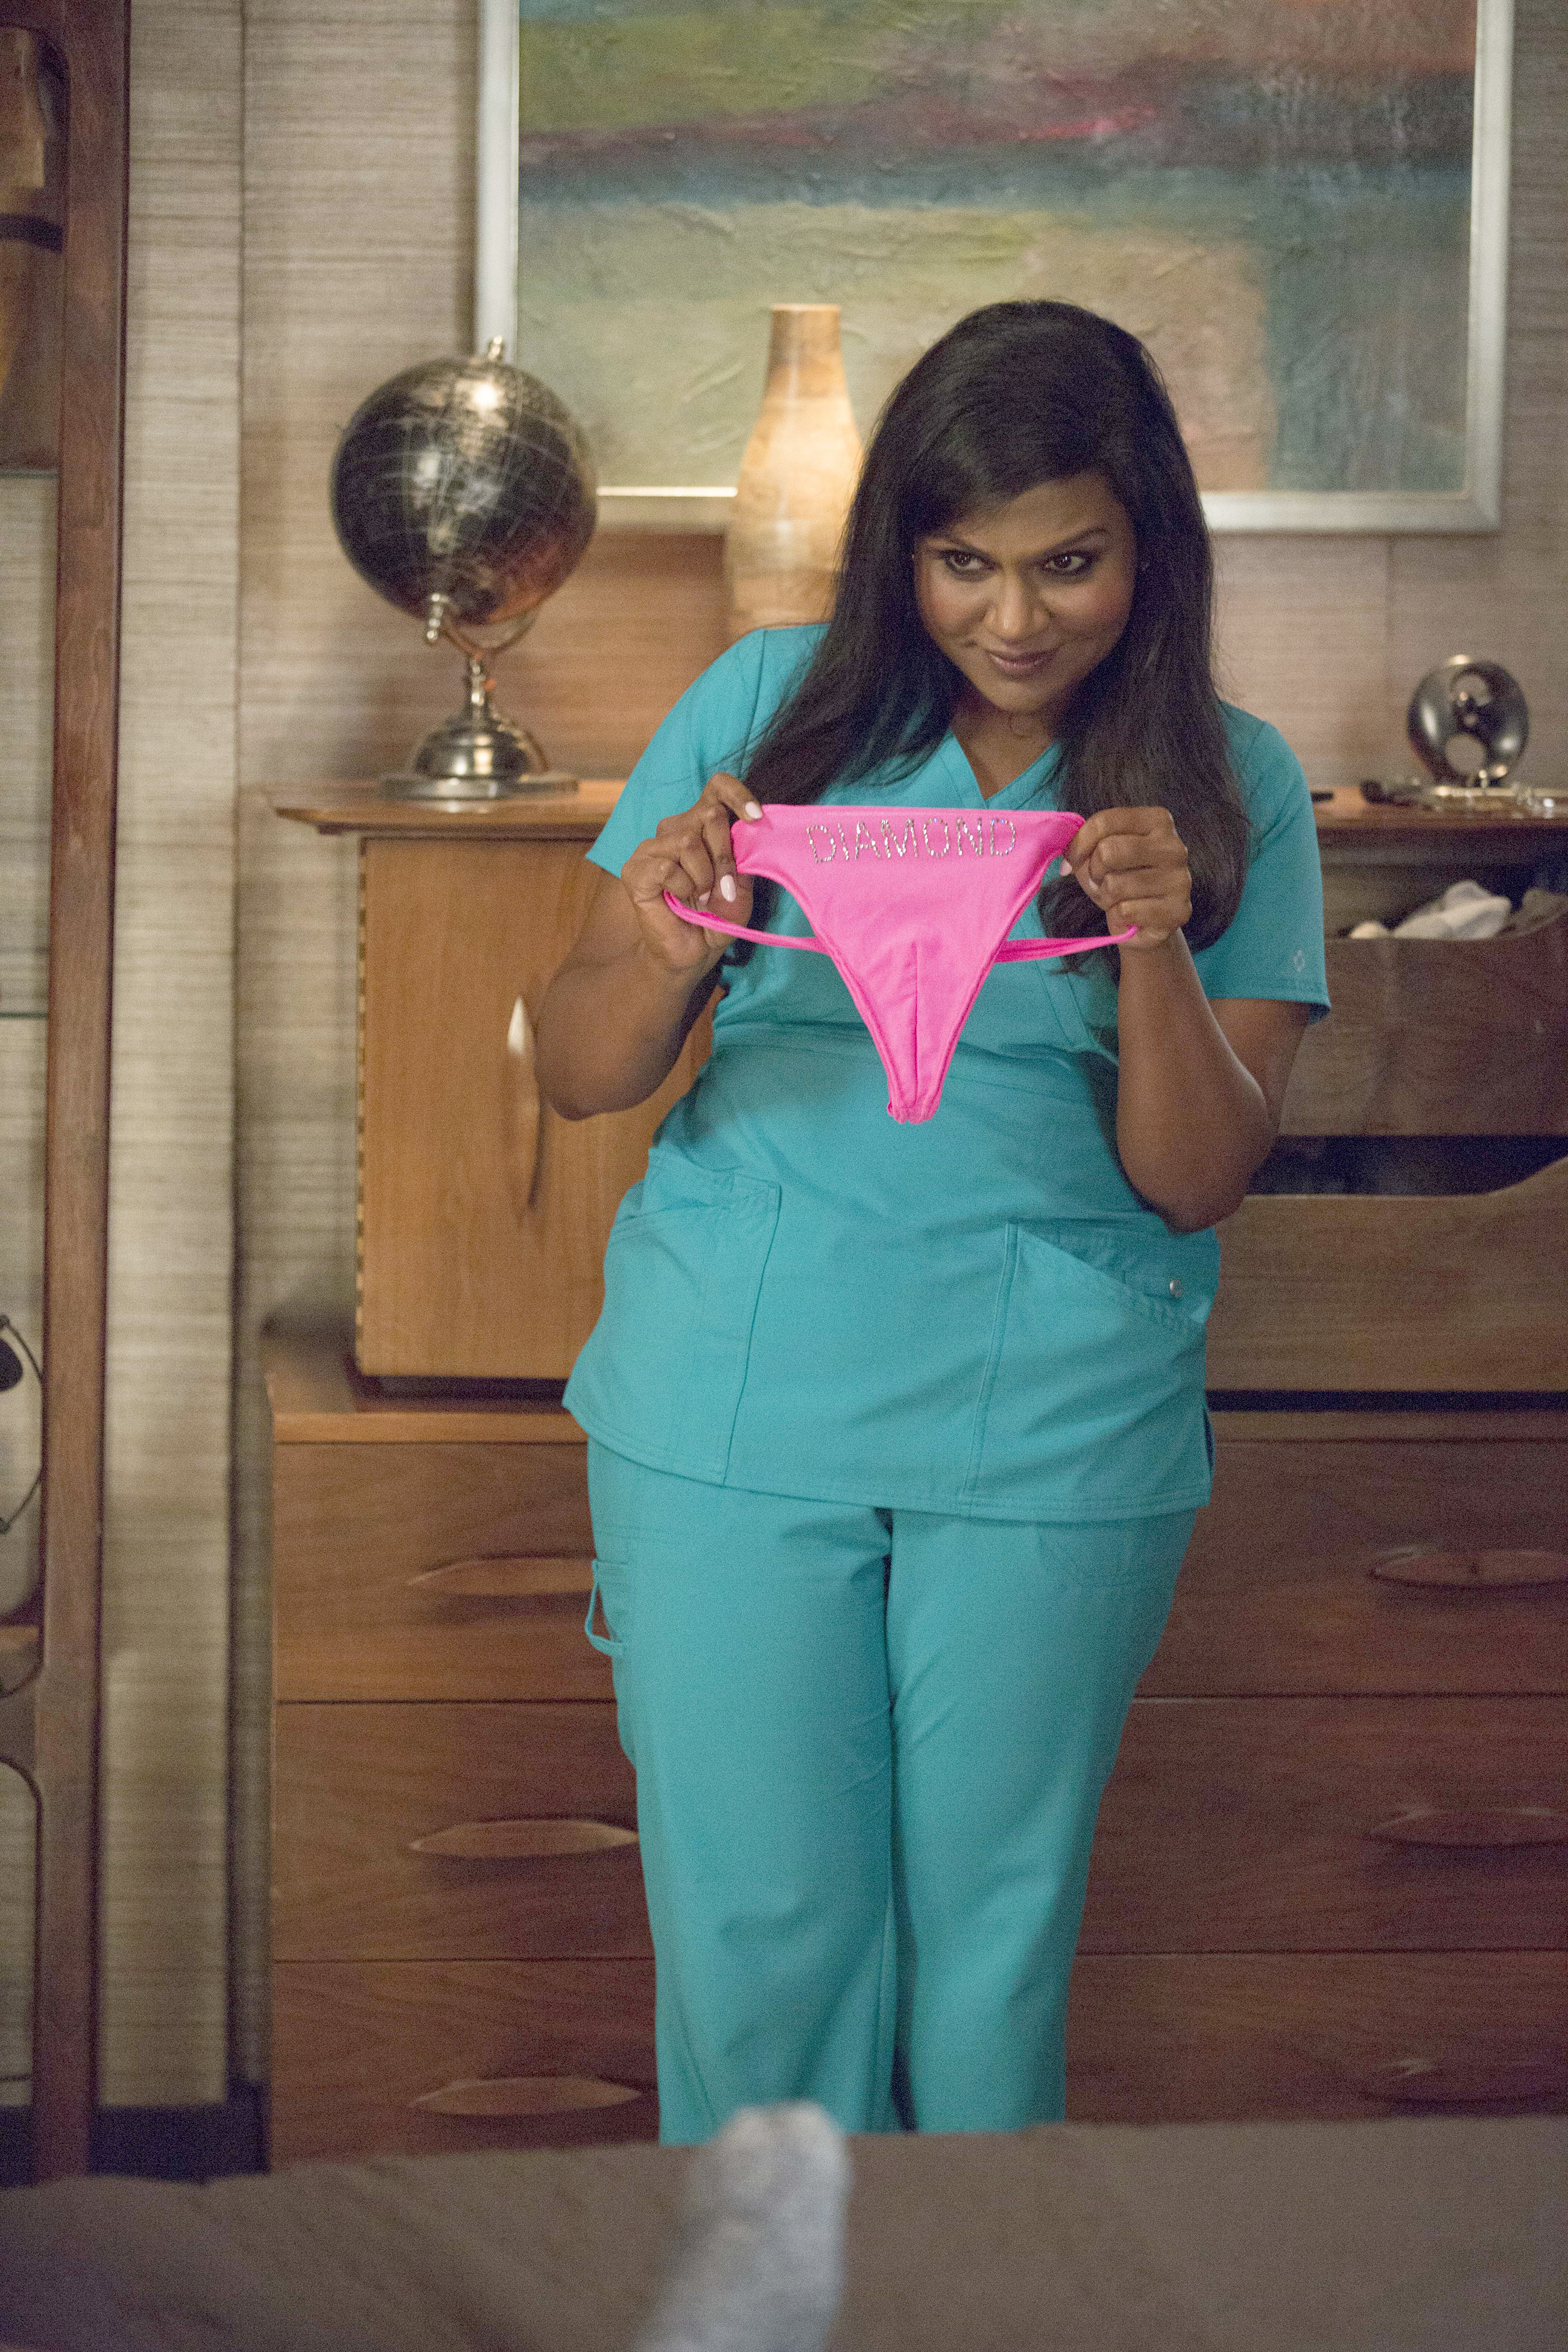 Mindy Lahiri's Colorful Lingerie Is The Best On Television, And